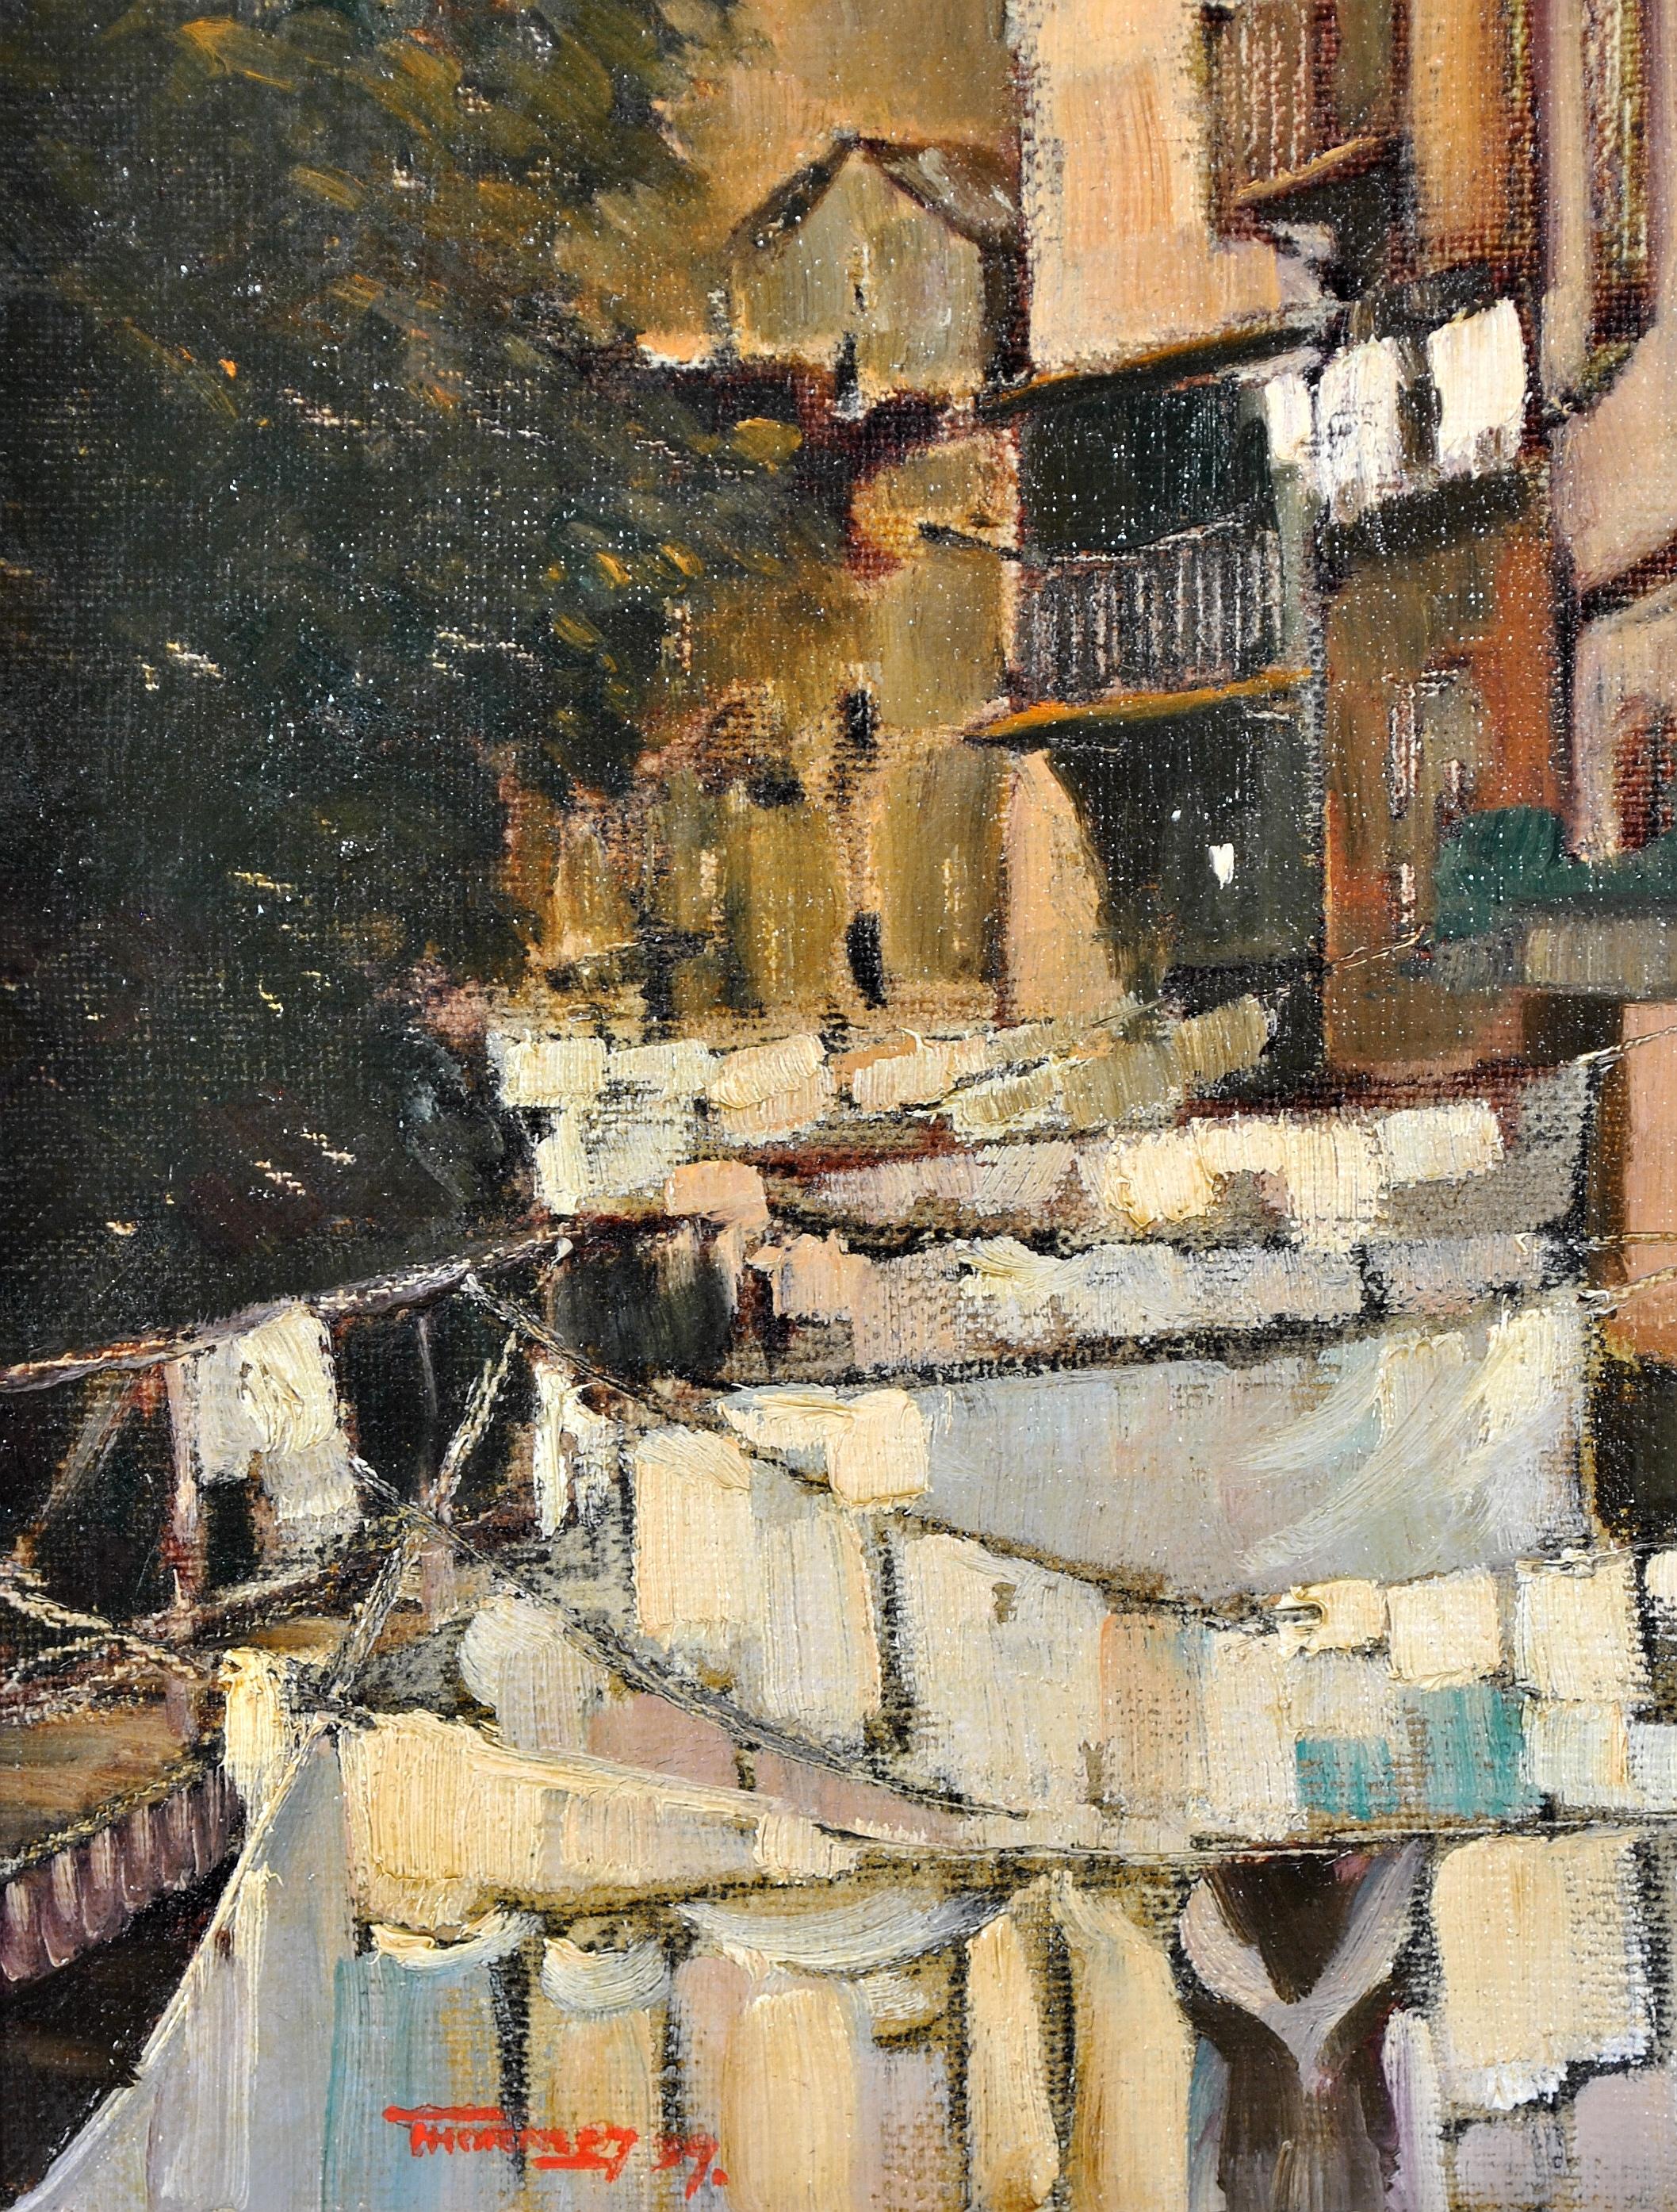 Villefranche - Washing on the Lines French Riviera South of France Oil Painting For Sale 2